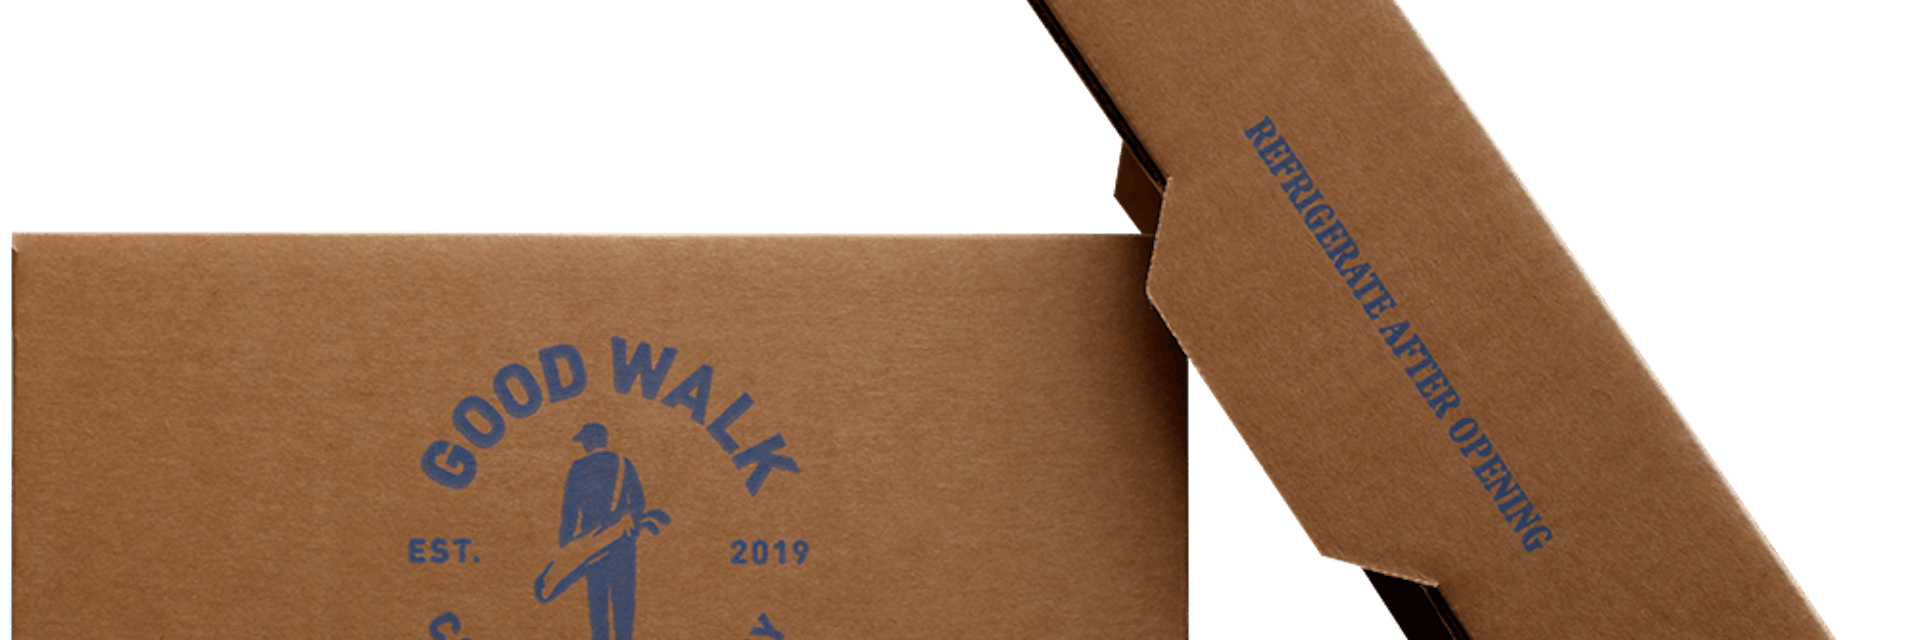 Beverage shipping boxes custom printed